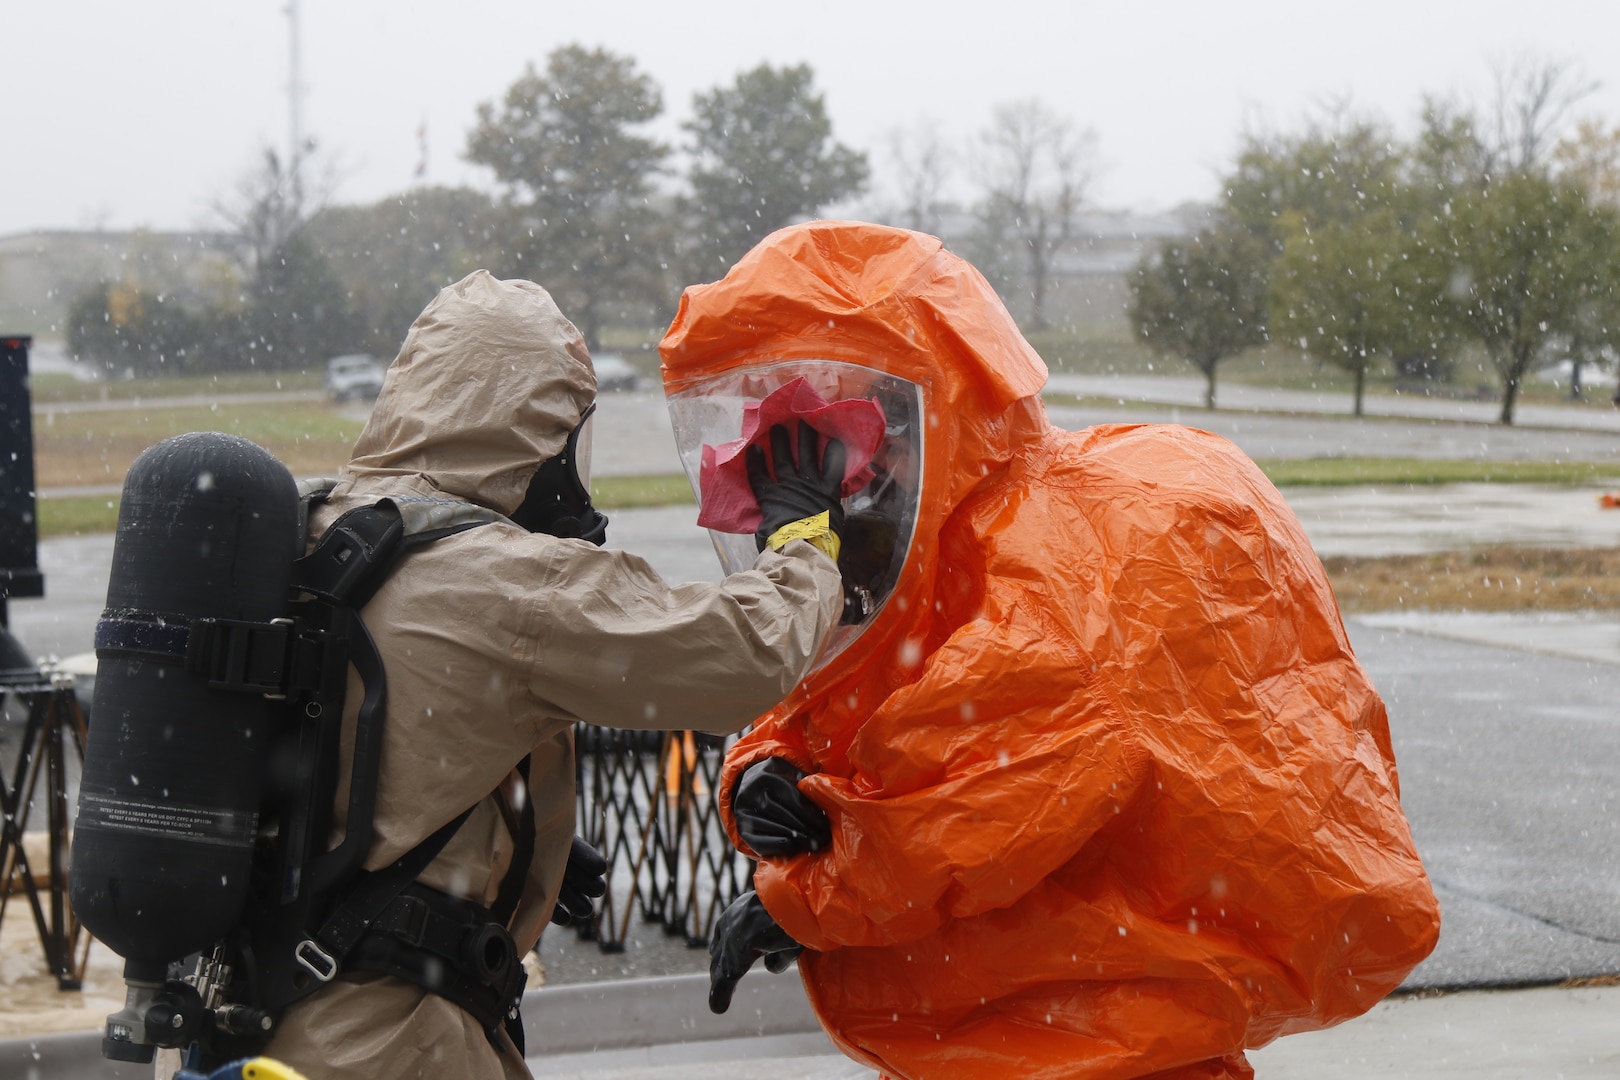 Photo: Staff Sgt. Corey Simmons, decontamination officer, 63rd Civil Support Team, Oklahoma National Guard, wipes down a Level A hazard suit of Sgt. Christina Burgess, surveyor, also a 63rd Civil Support Team member, during decontamination after a mission in the Boone County Fire Protection District, Columbia, Missouri, Oct. 26, 2020. The 63rd Civil Support Team conducted a four-day joint training exercise to evaluate their response in supporting civil authorities at a domestic Chemical, Biological, Radiological, Nuclear, and High Yield Explosive (CBRNE) incident site. CBRNE agents advise on response measures and assist with appropriate requests for additional support. (Oklahoma Army National Guard Photo by Spc. Caleb Stone)